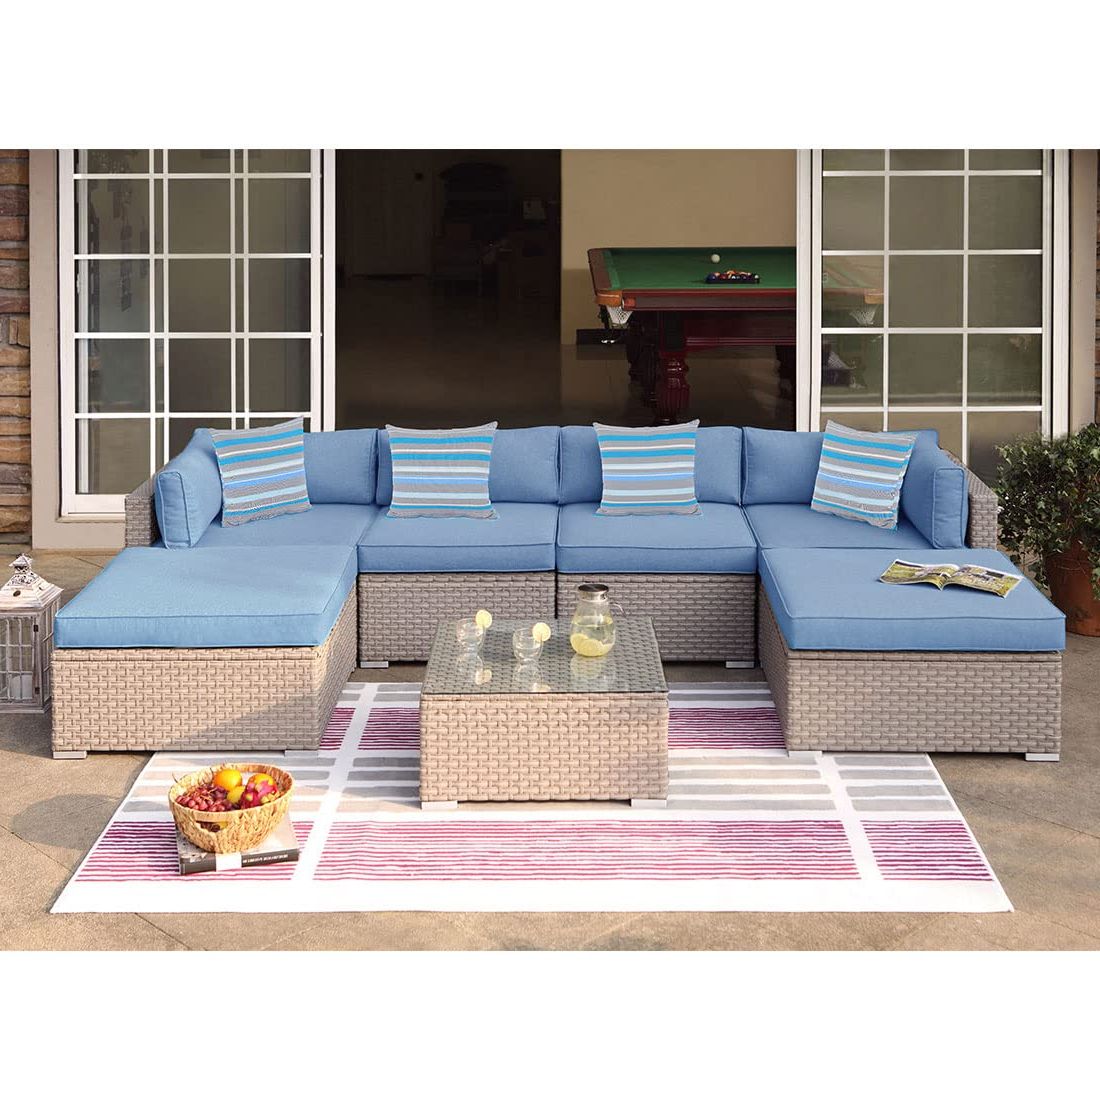 Amazon: Cosiest 7 Piece Outdoor Wicker Patio Furniture Set All Weather  Rattan Sectional Sofa W Thick Cushions, Glass Table, Pillows For Garden,  Pool, Backyard : Patio, Lawn & Garden Throughout Popular All Weather Wicker Sectional Seating Group (View 2 of 15)